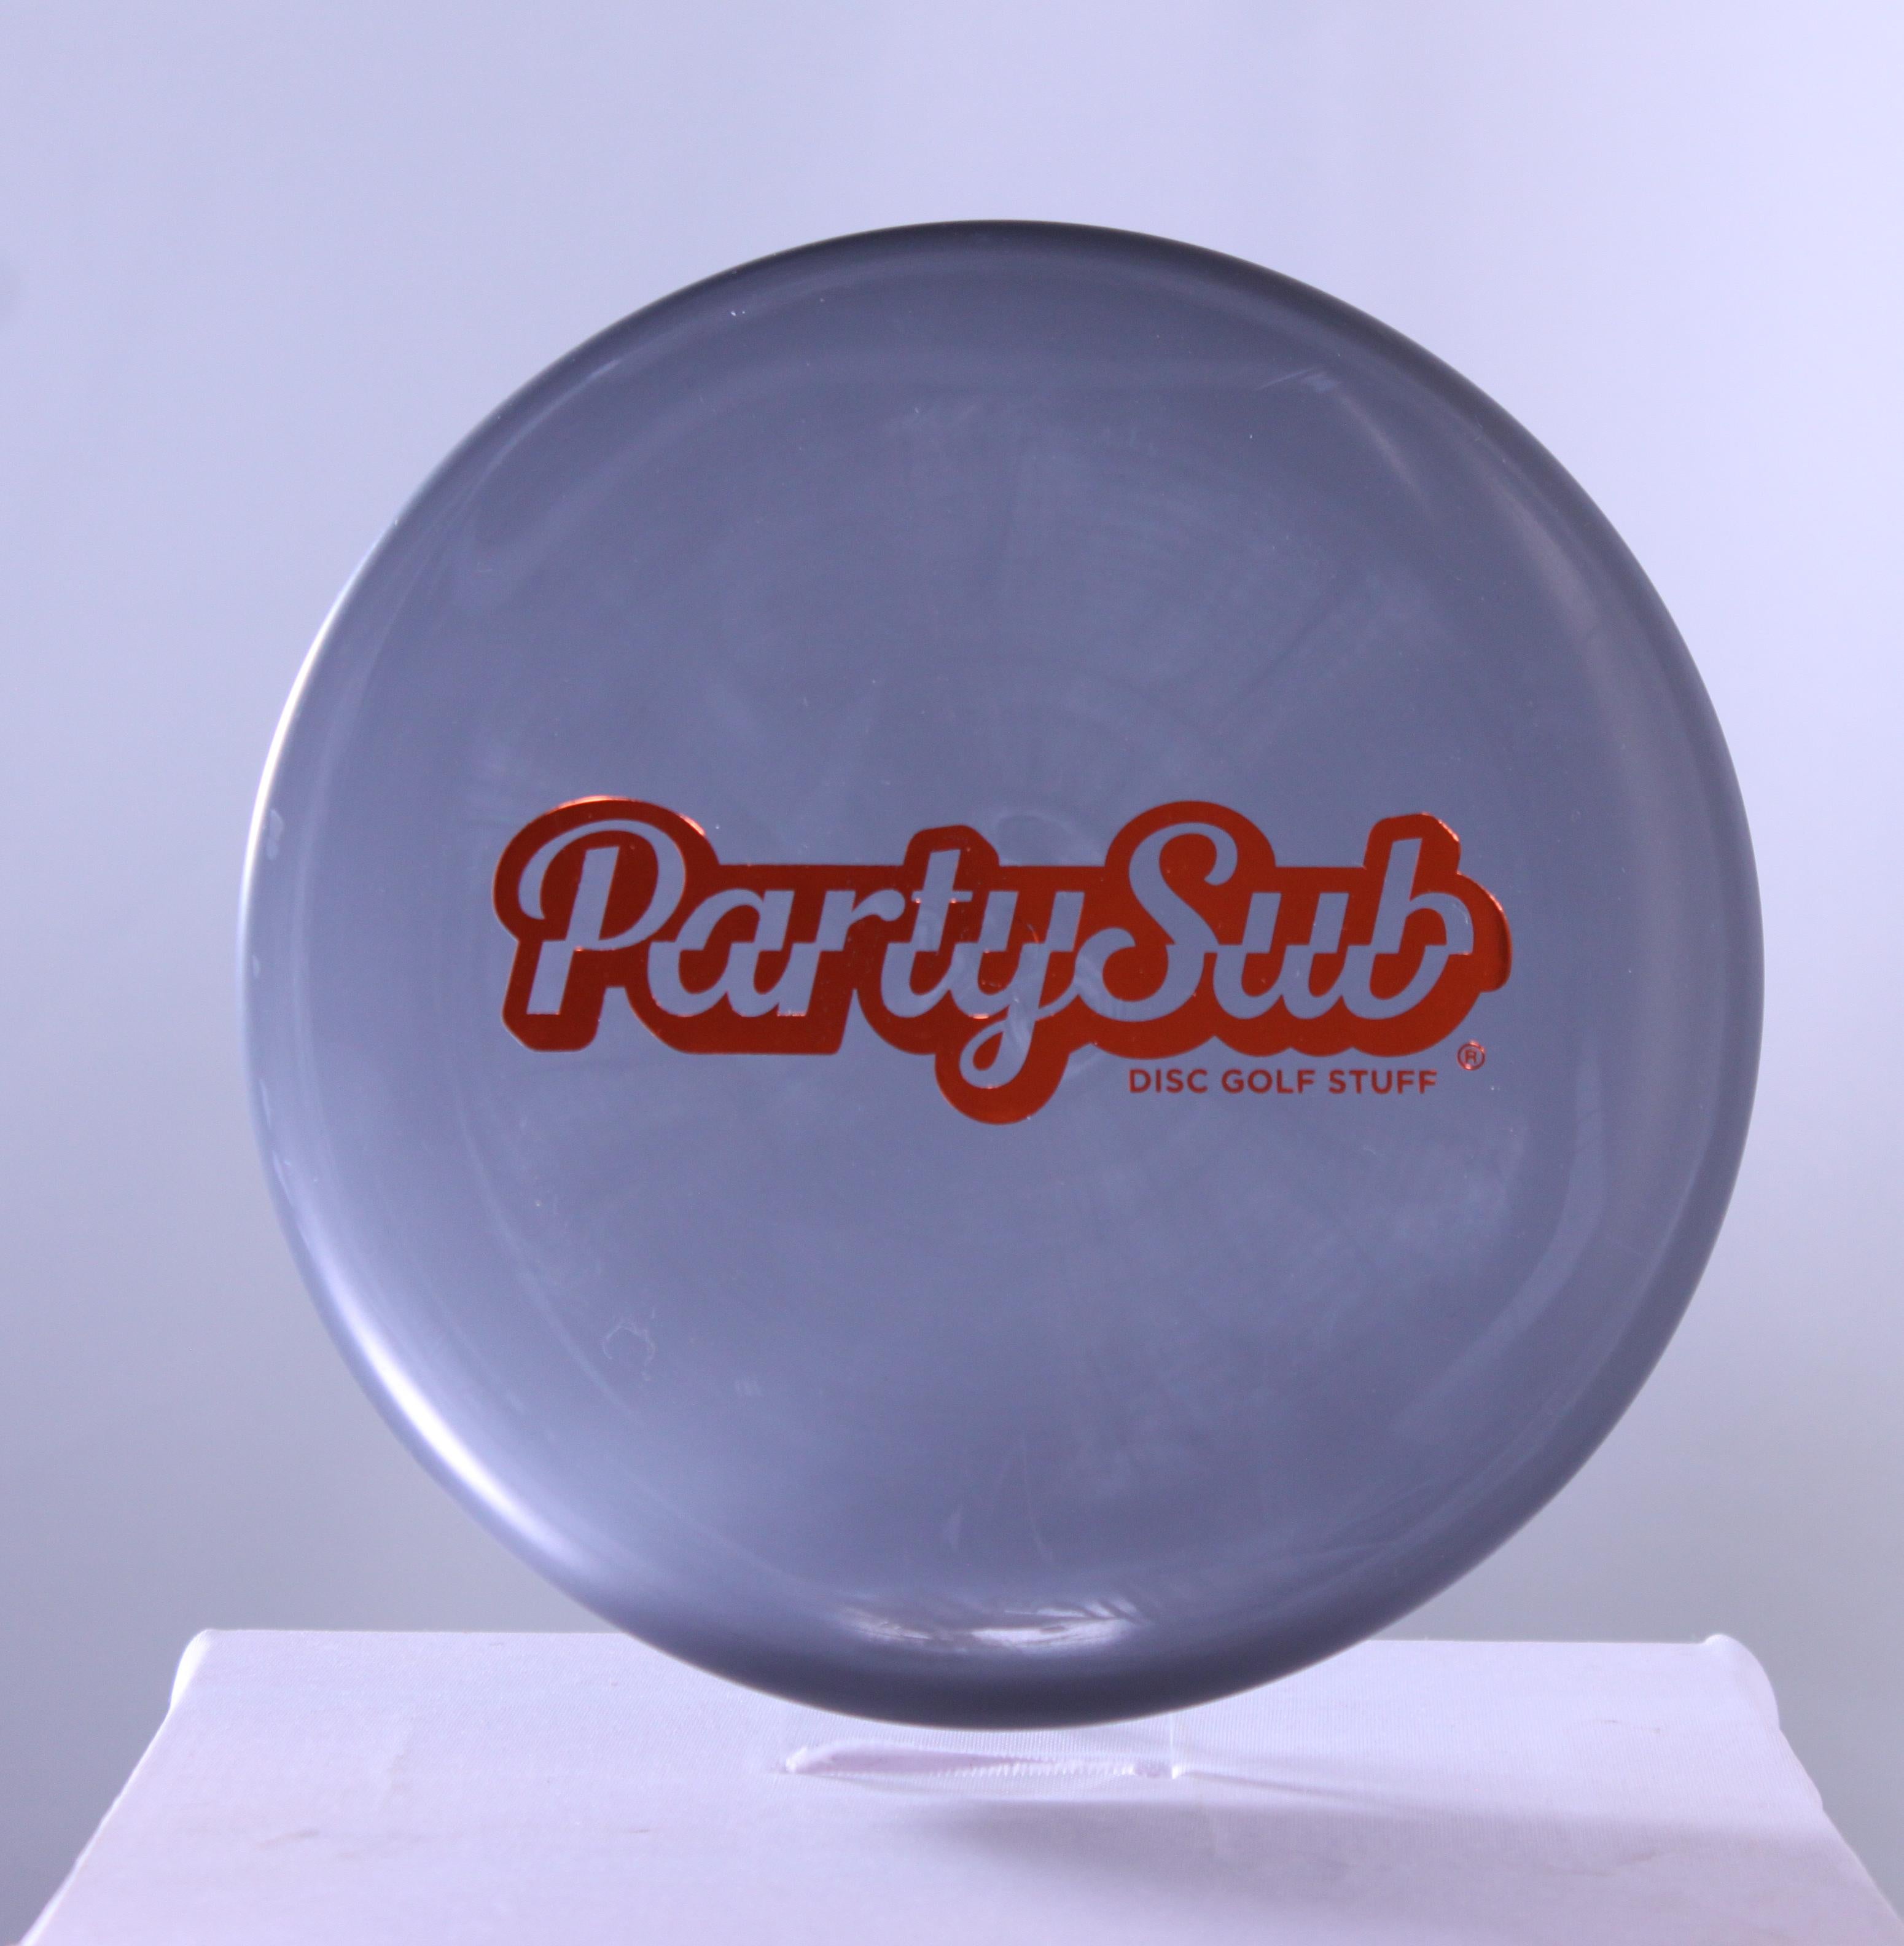 PartySub Bar Stamp Classic Blend Warden